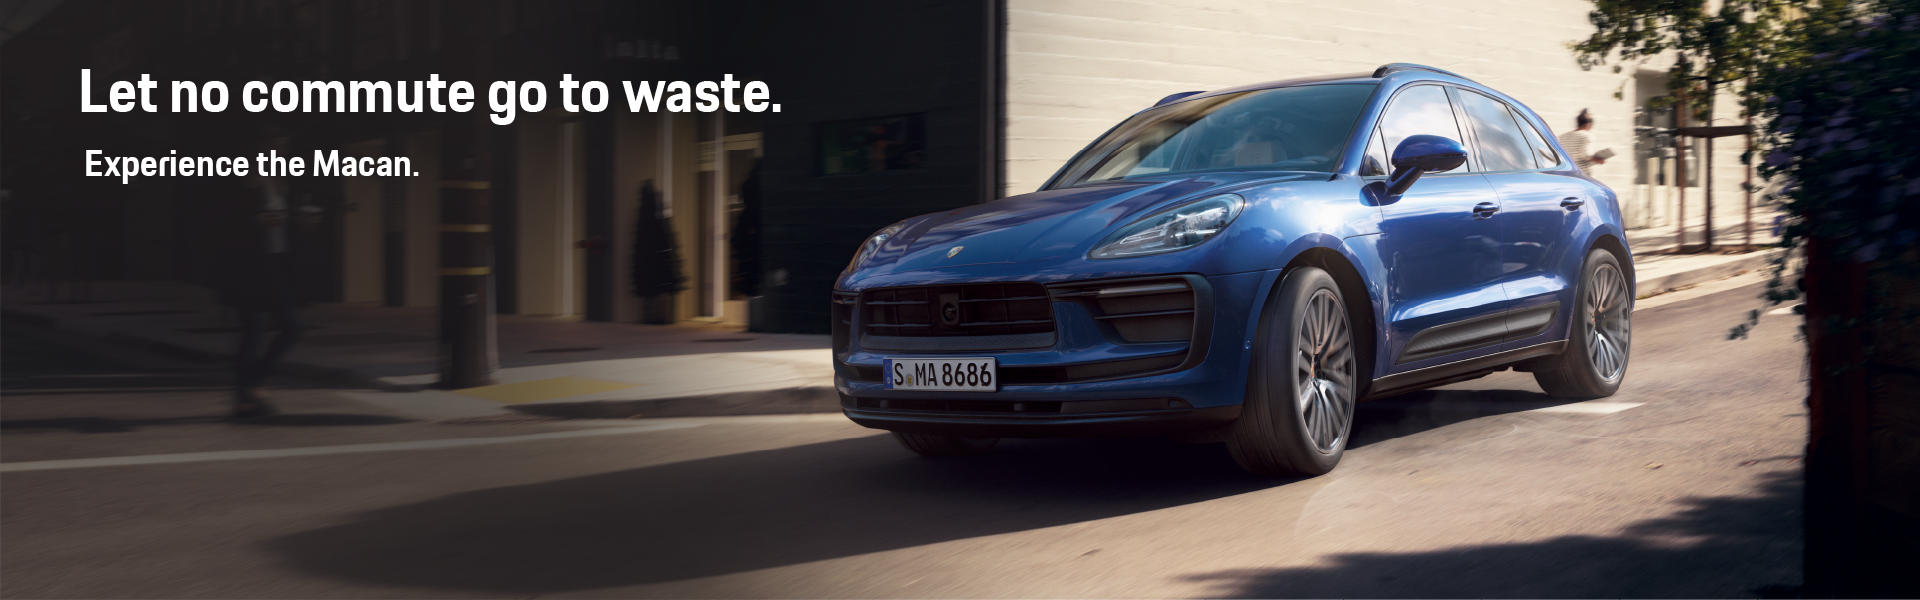 Experience the Macan